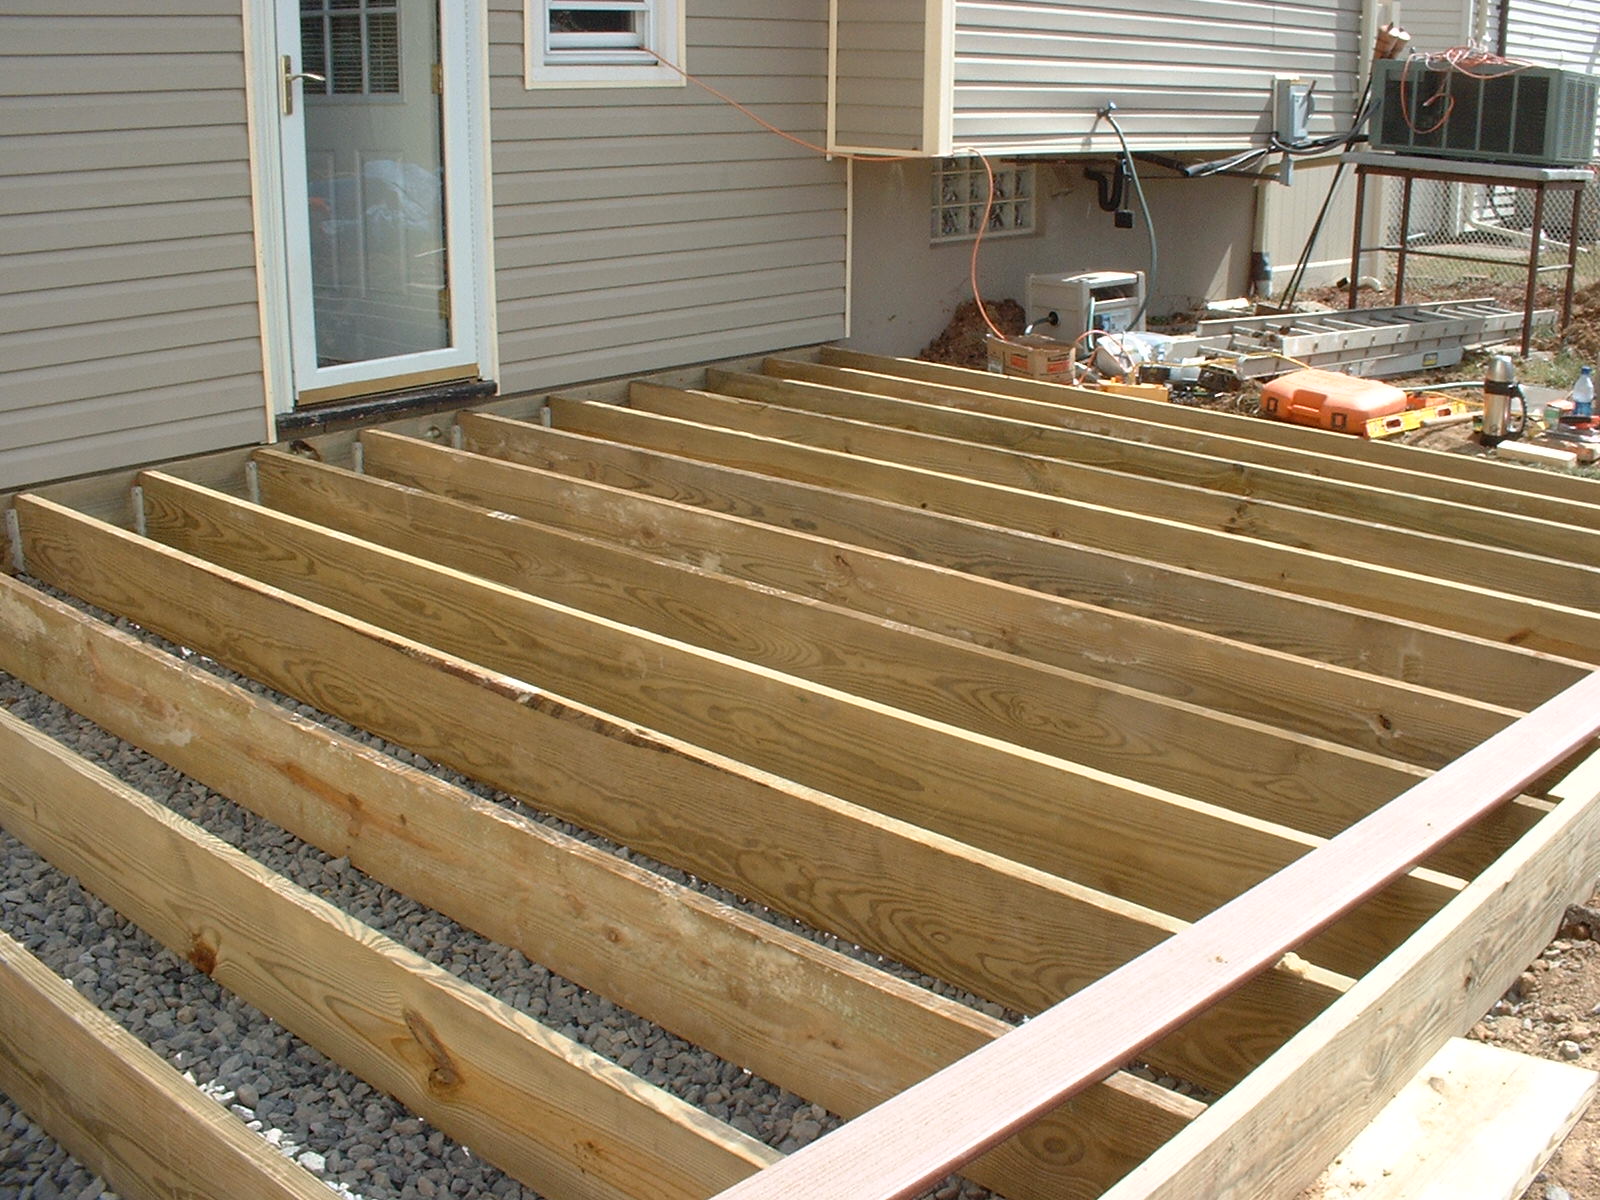 The frame is finished and the decking is started.